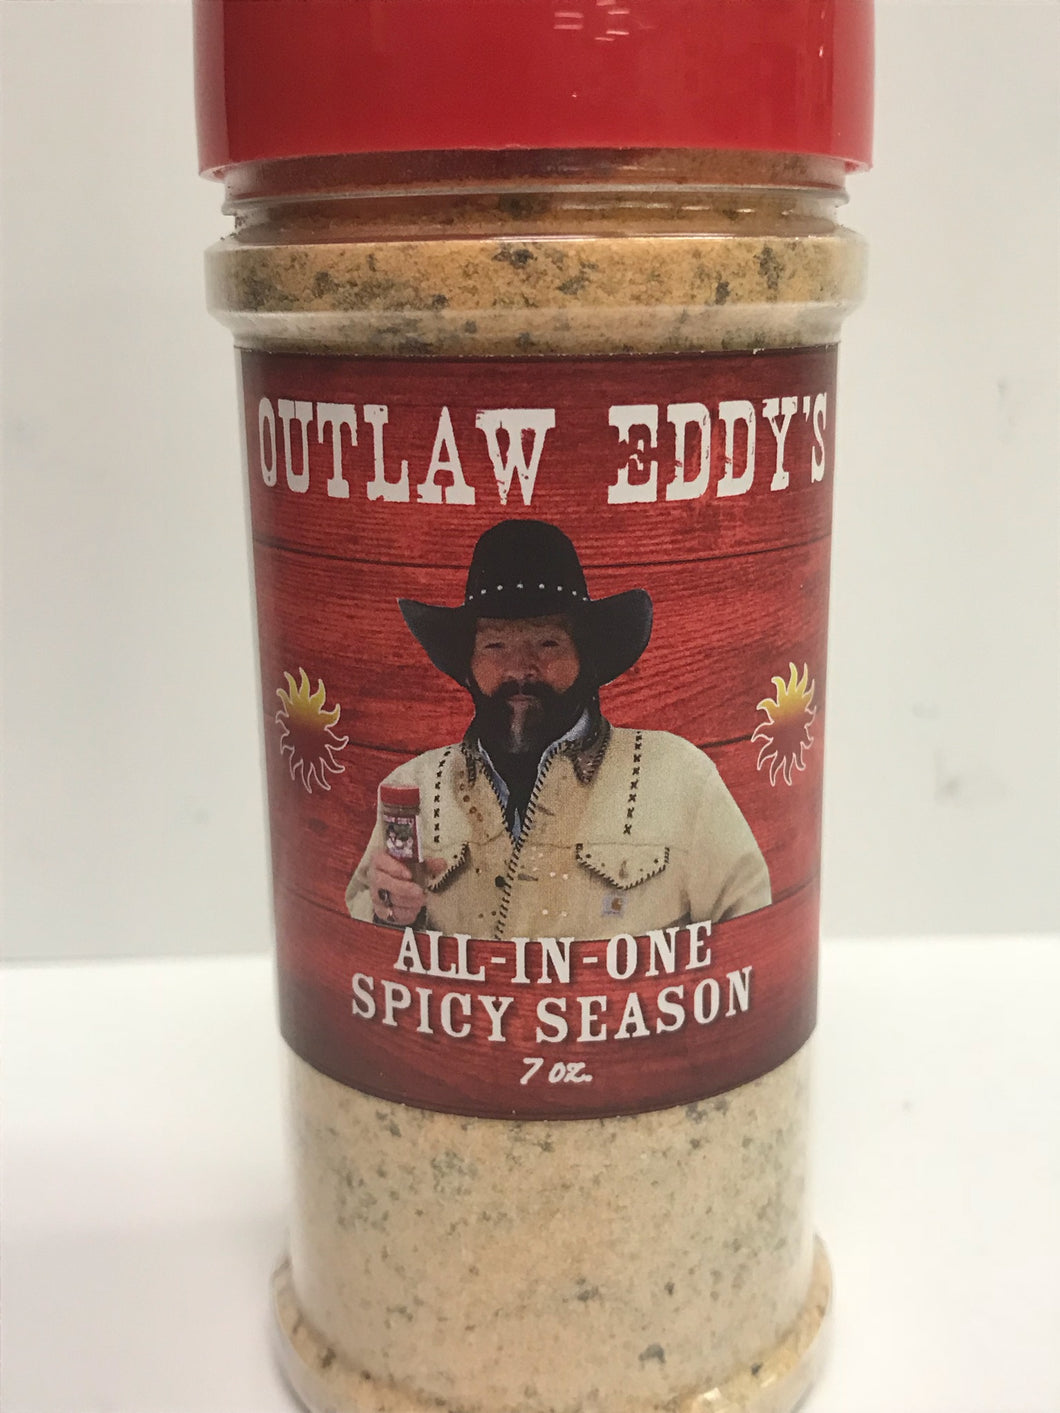 Outlaw Spice Rubs